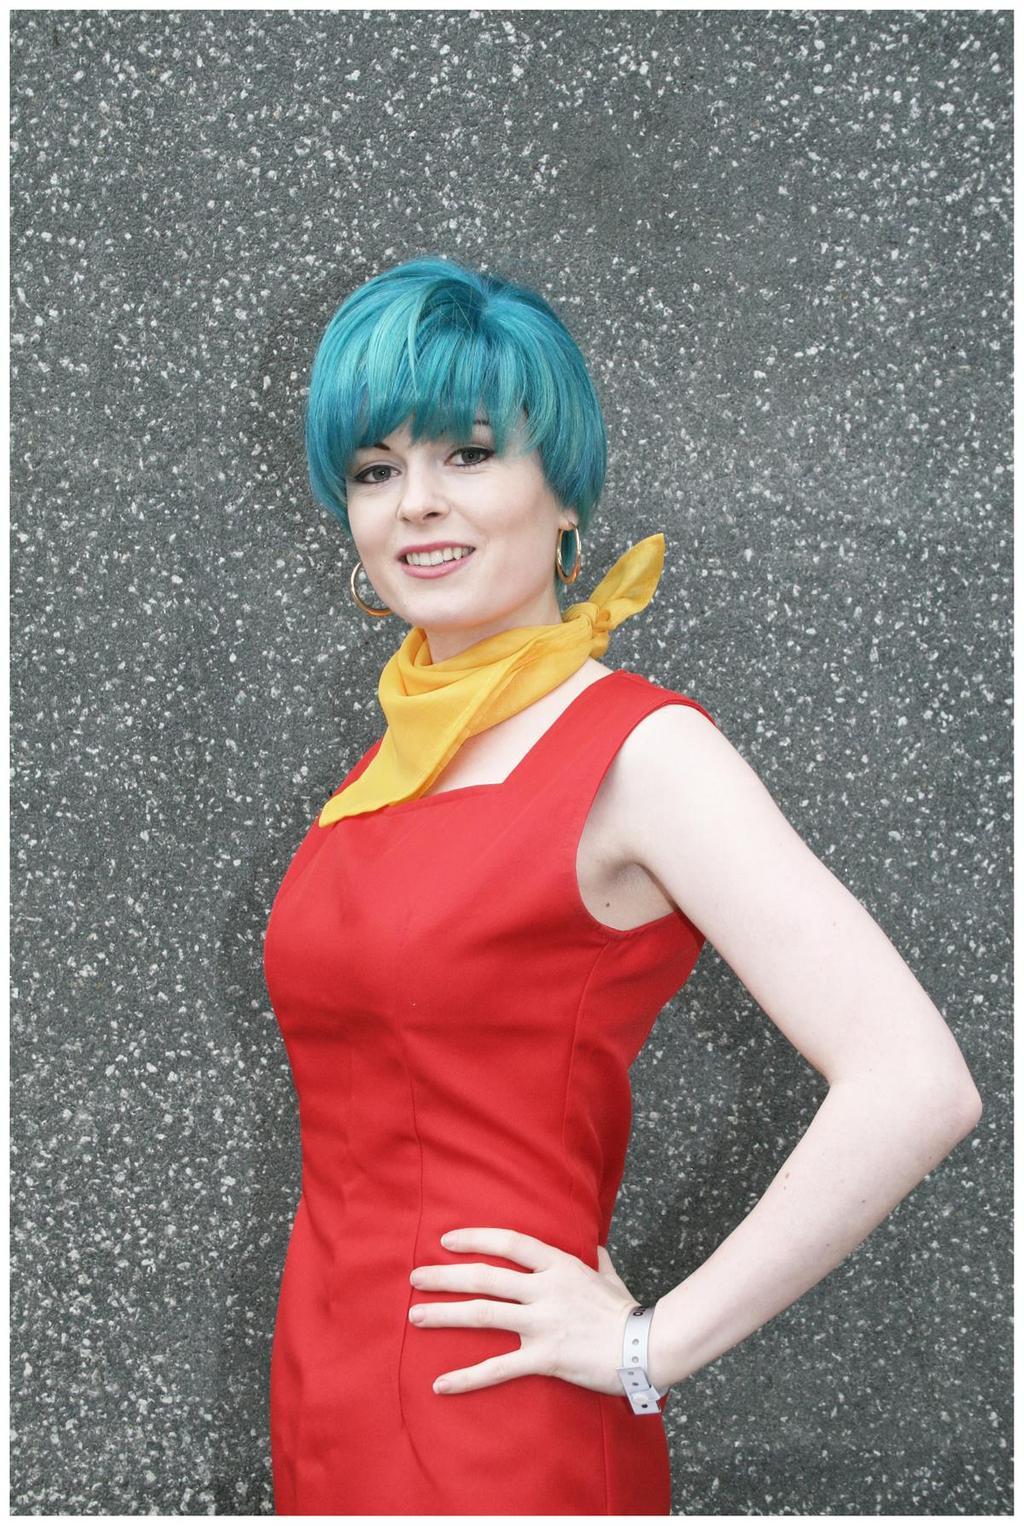 70+ Hot Pictures Of Bulma From Dragon Ball Z Are Sure To Get Your Heart Thumping Fast 23